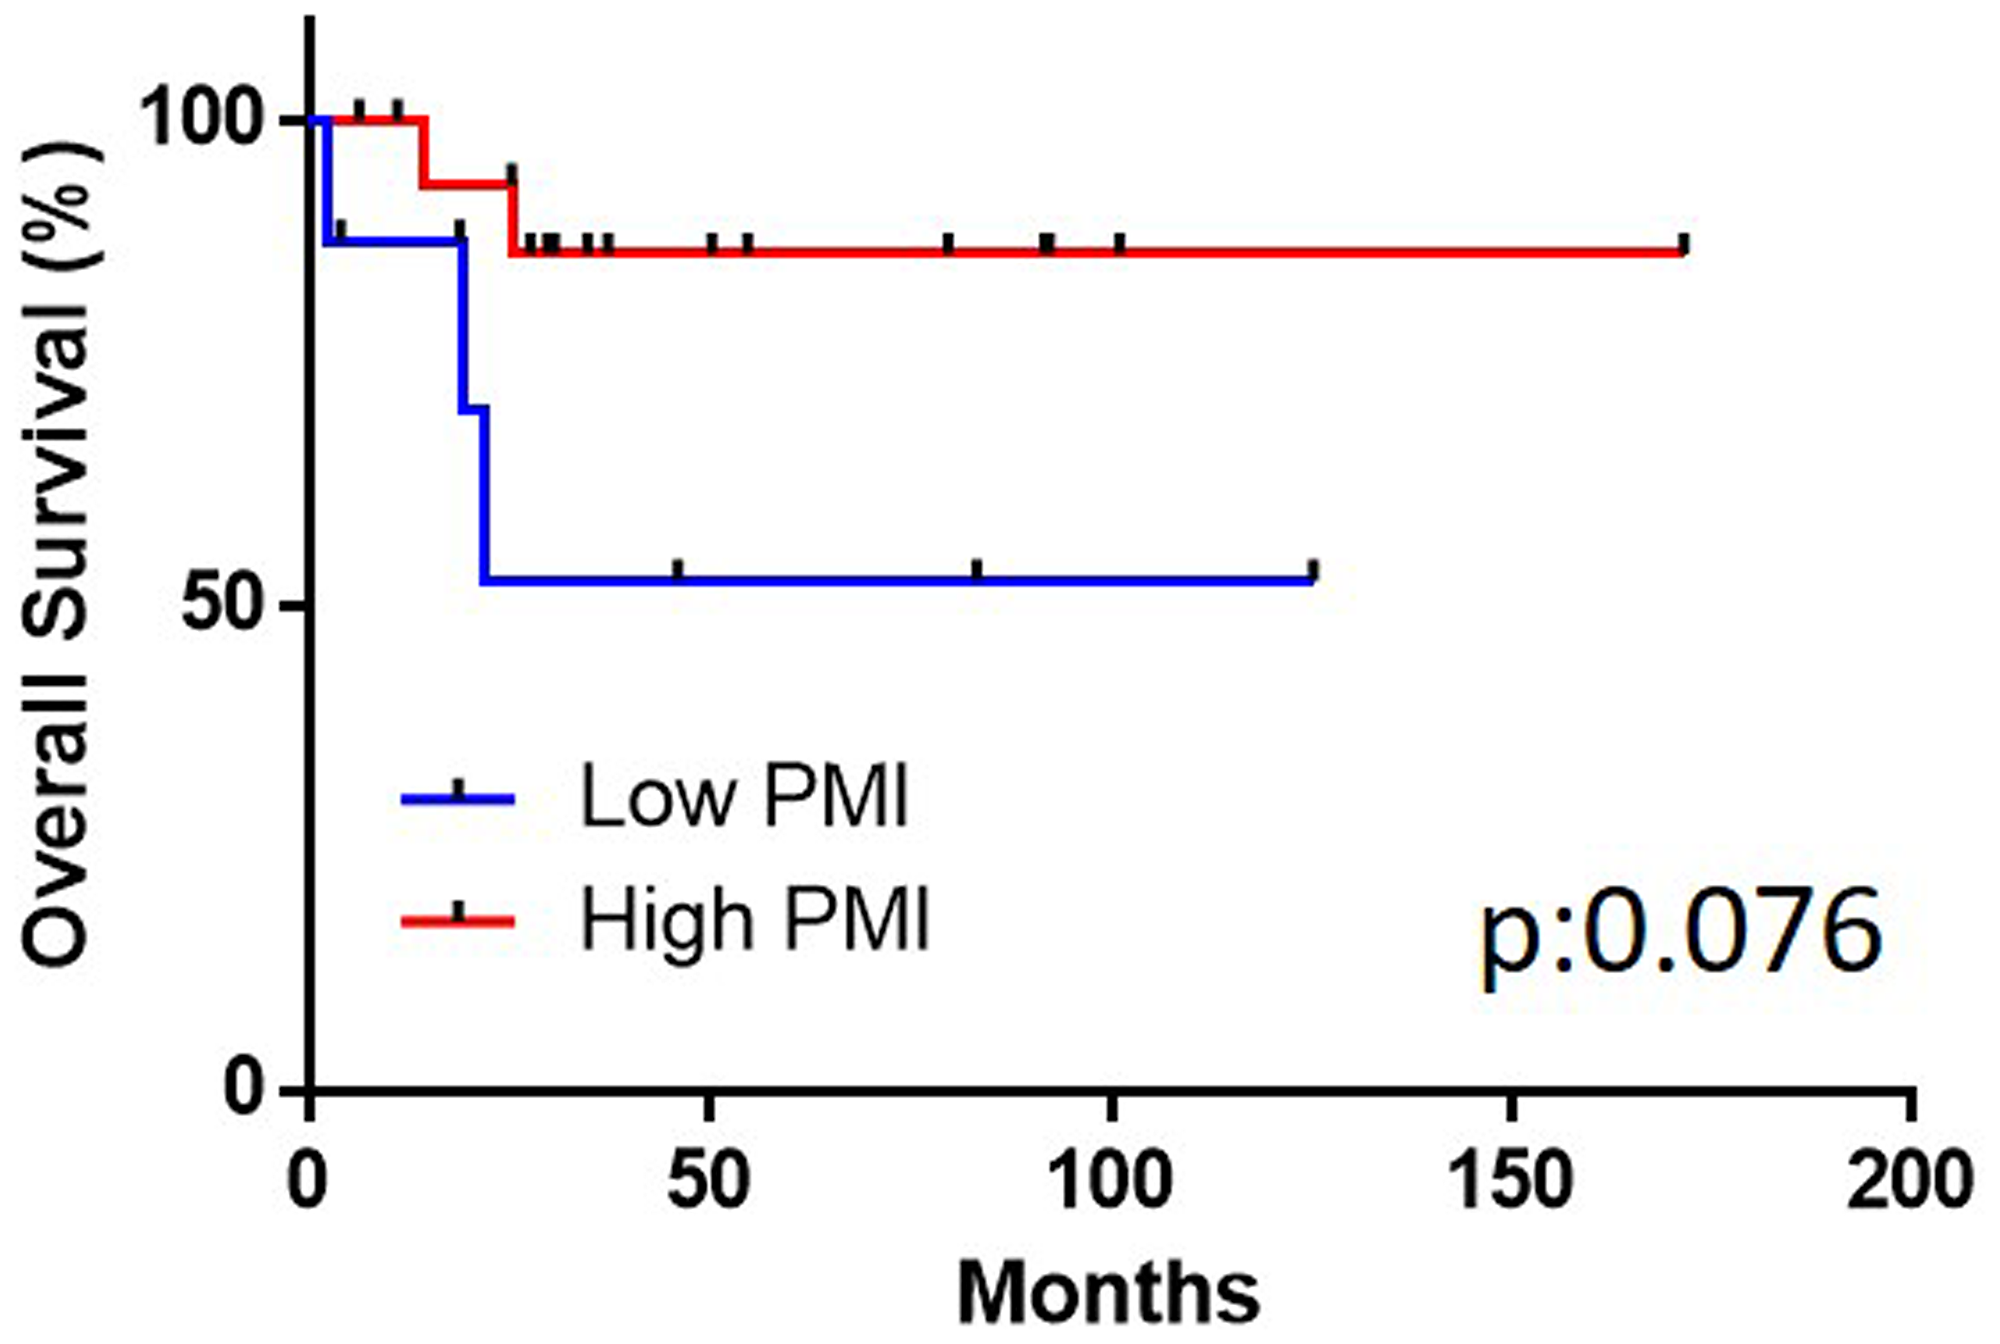 The overall survival in the high and low psoas muscle index (PMI) groups.